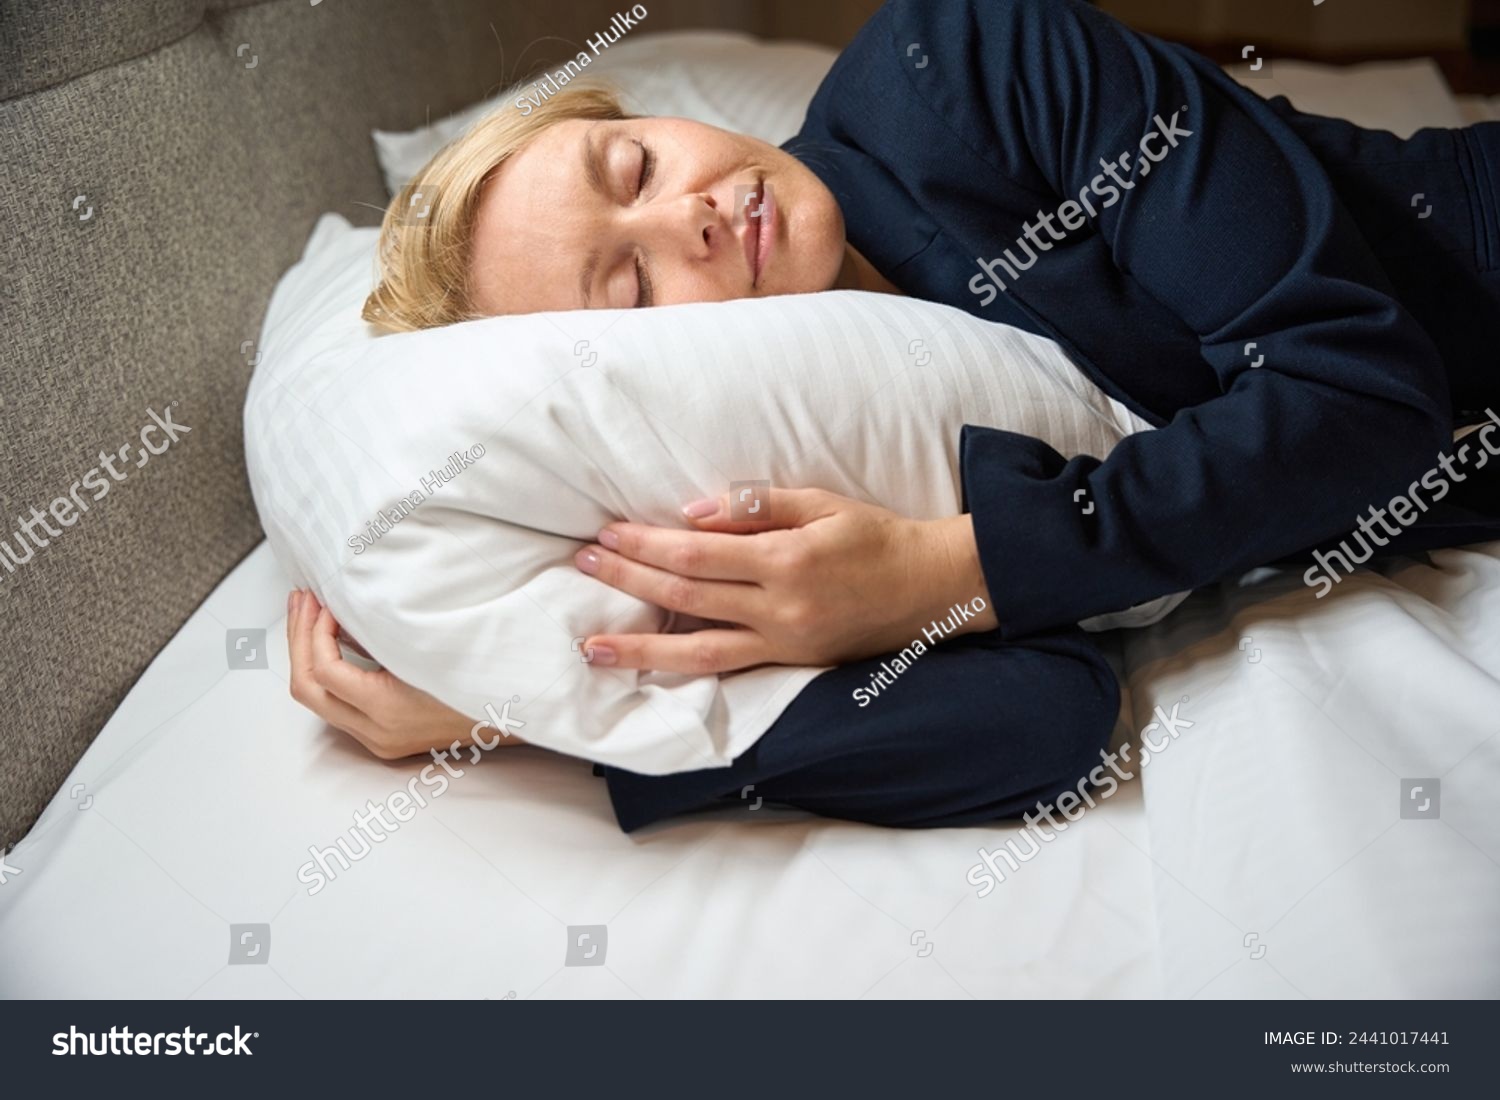 Exhausted businesswoman sleeping peacefully in her bedchamber #2441017441